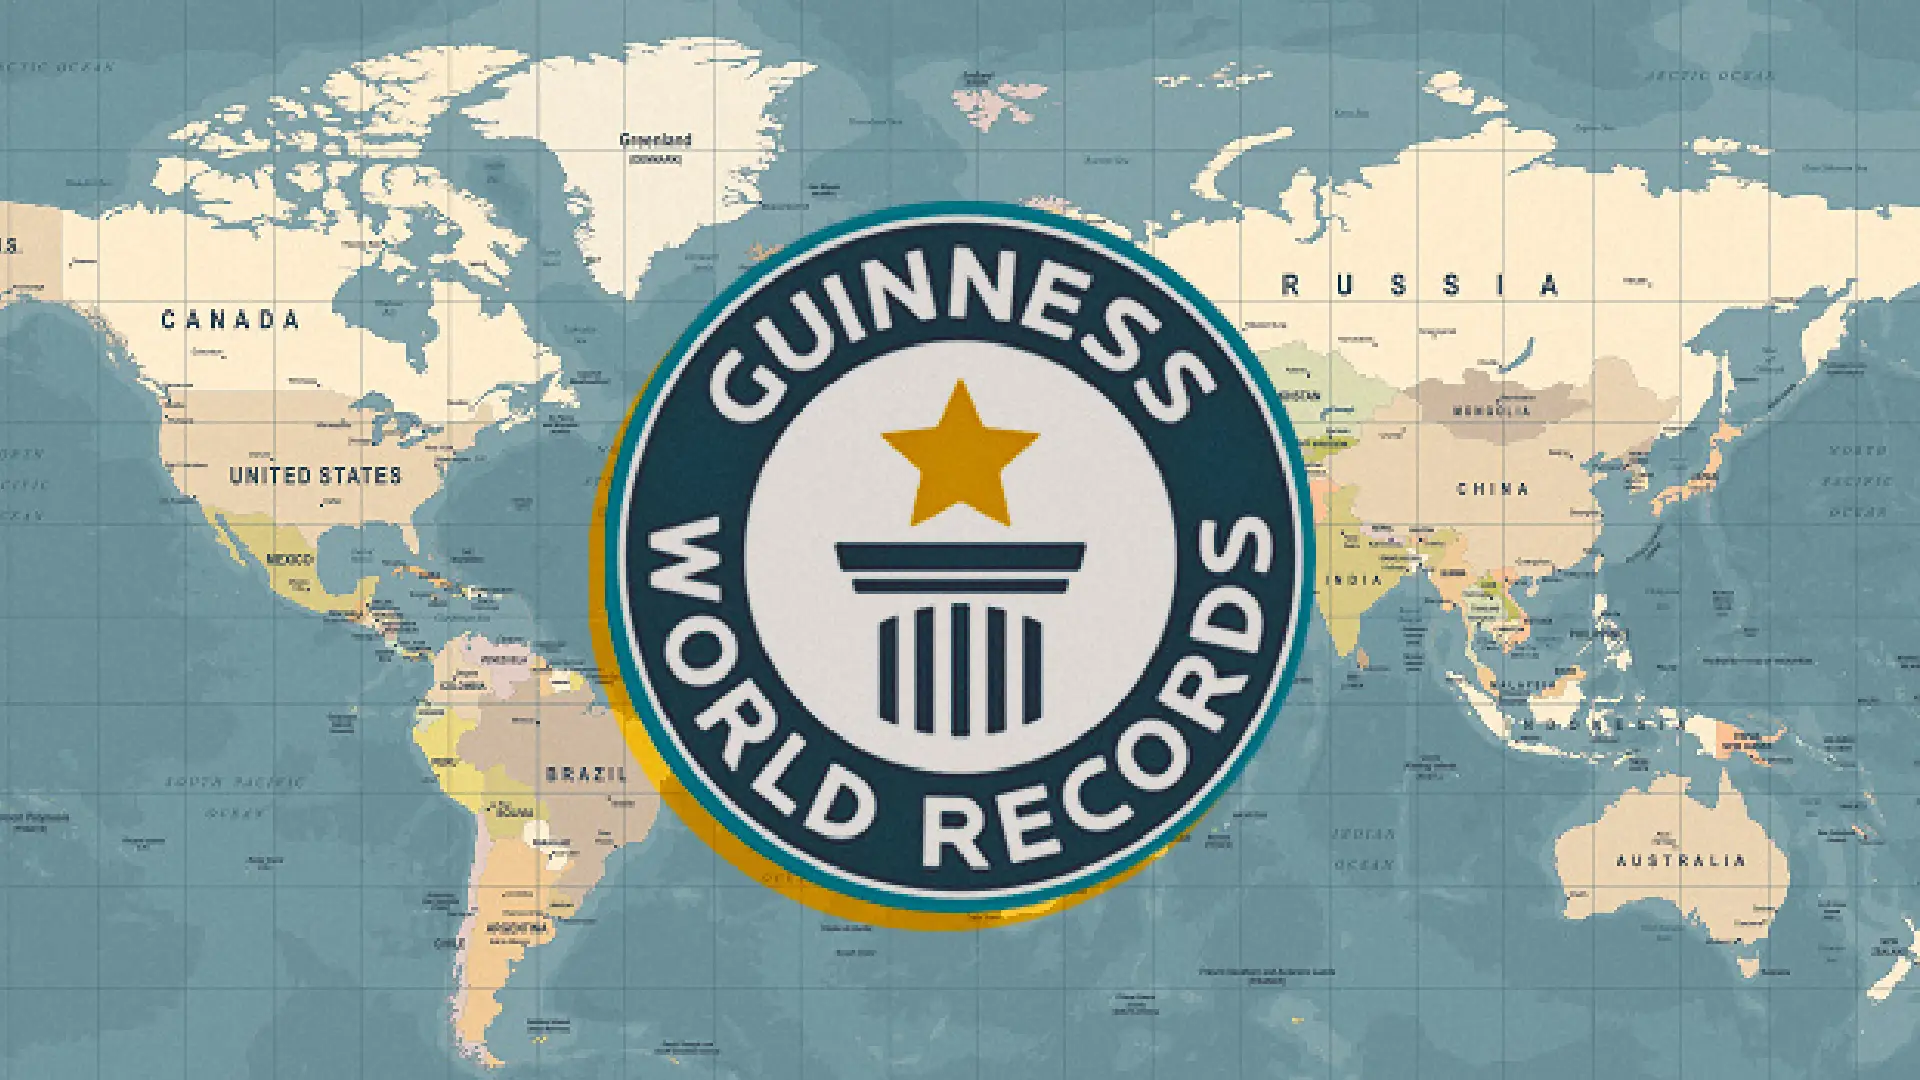 guinness book of world records: Watch: Over 5 lakh people perform